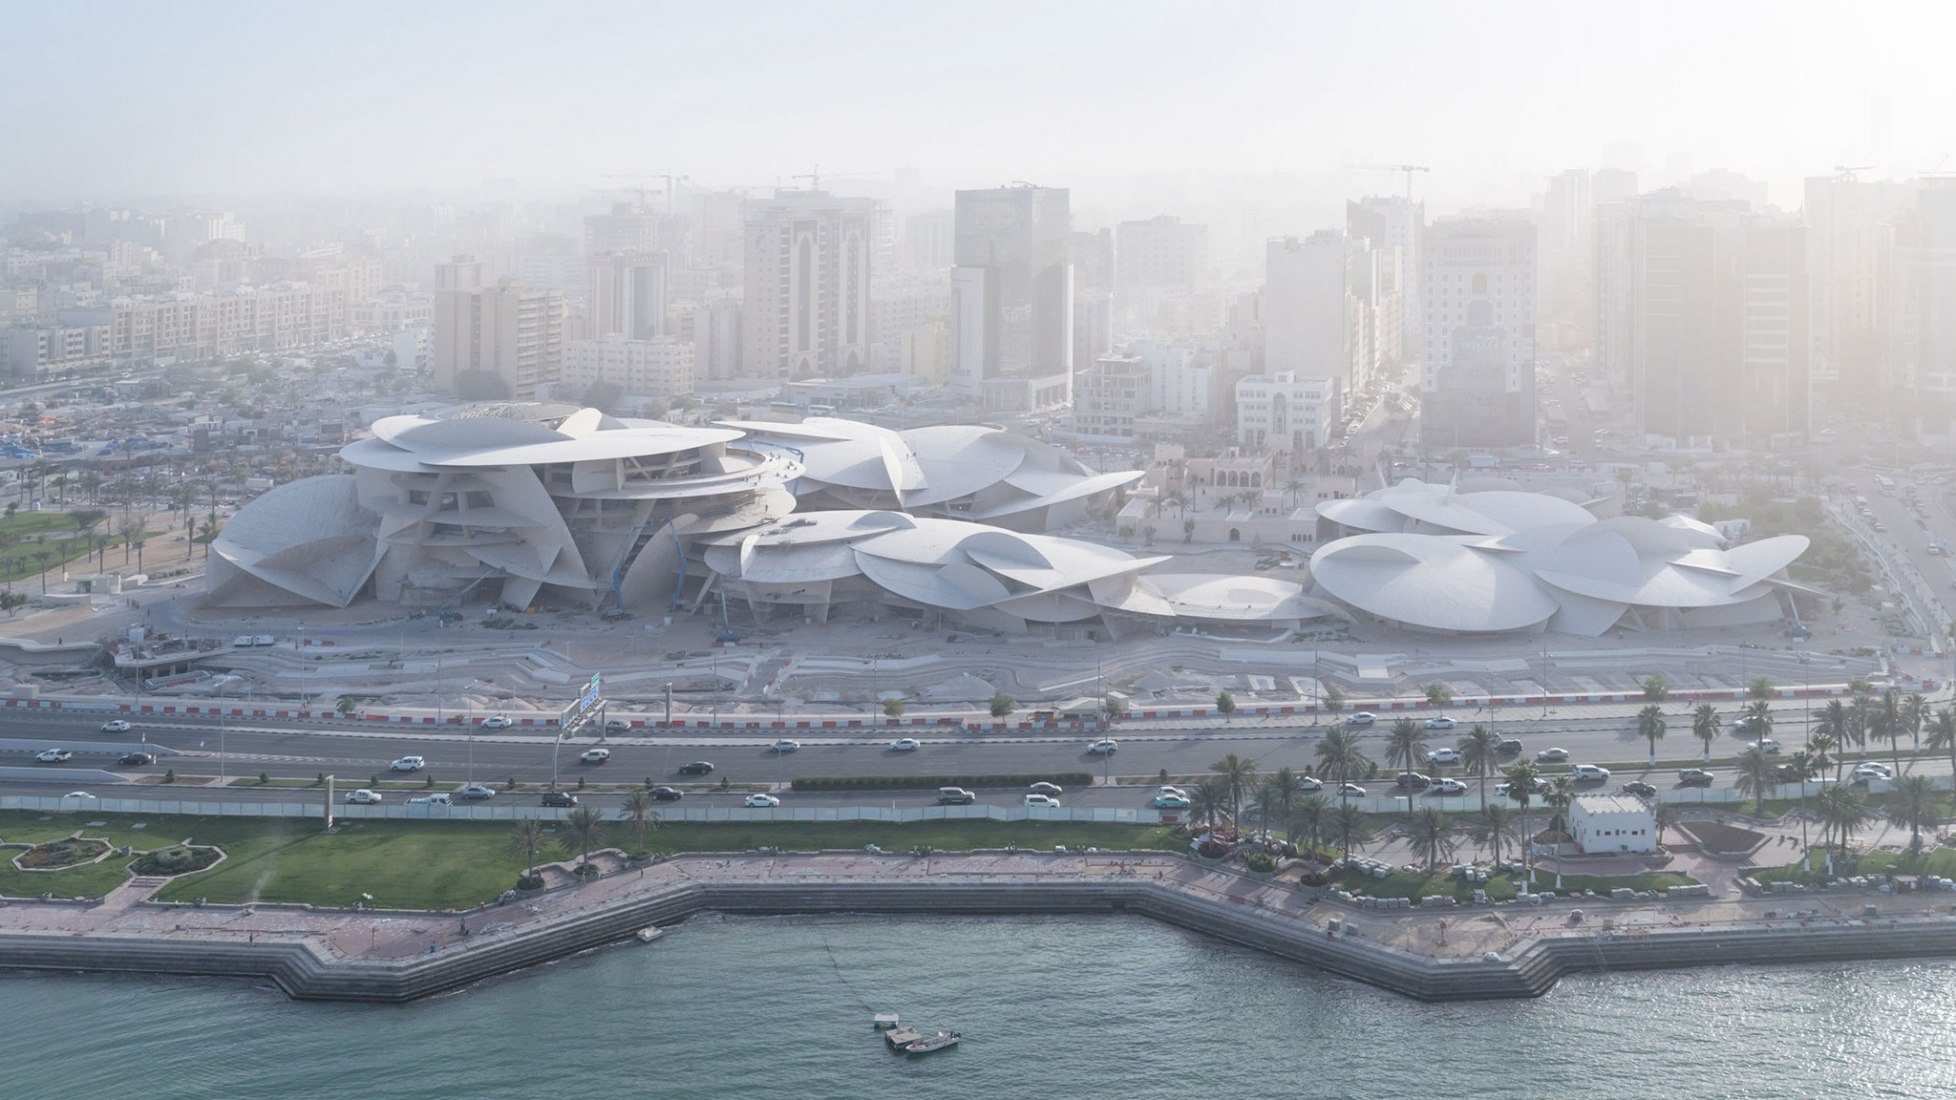 Overview. Qatar National Museum in Doha by Jean Nouvel. Photograph by Iwan Baan